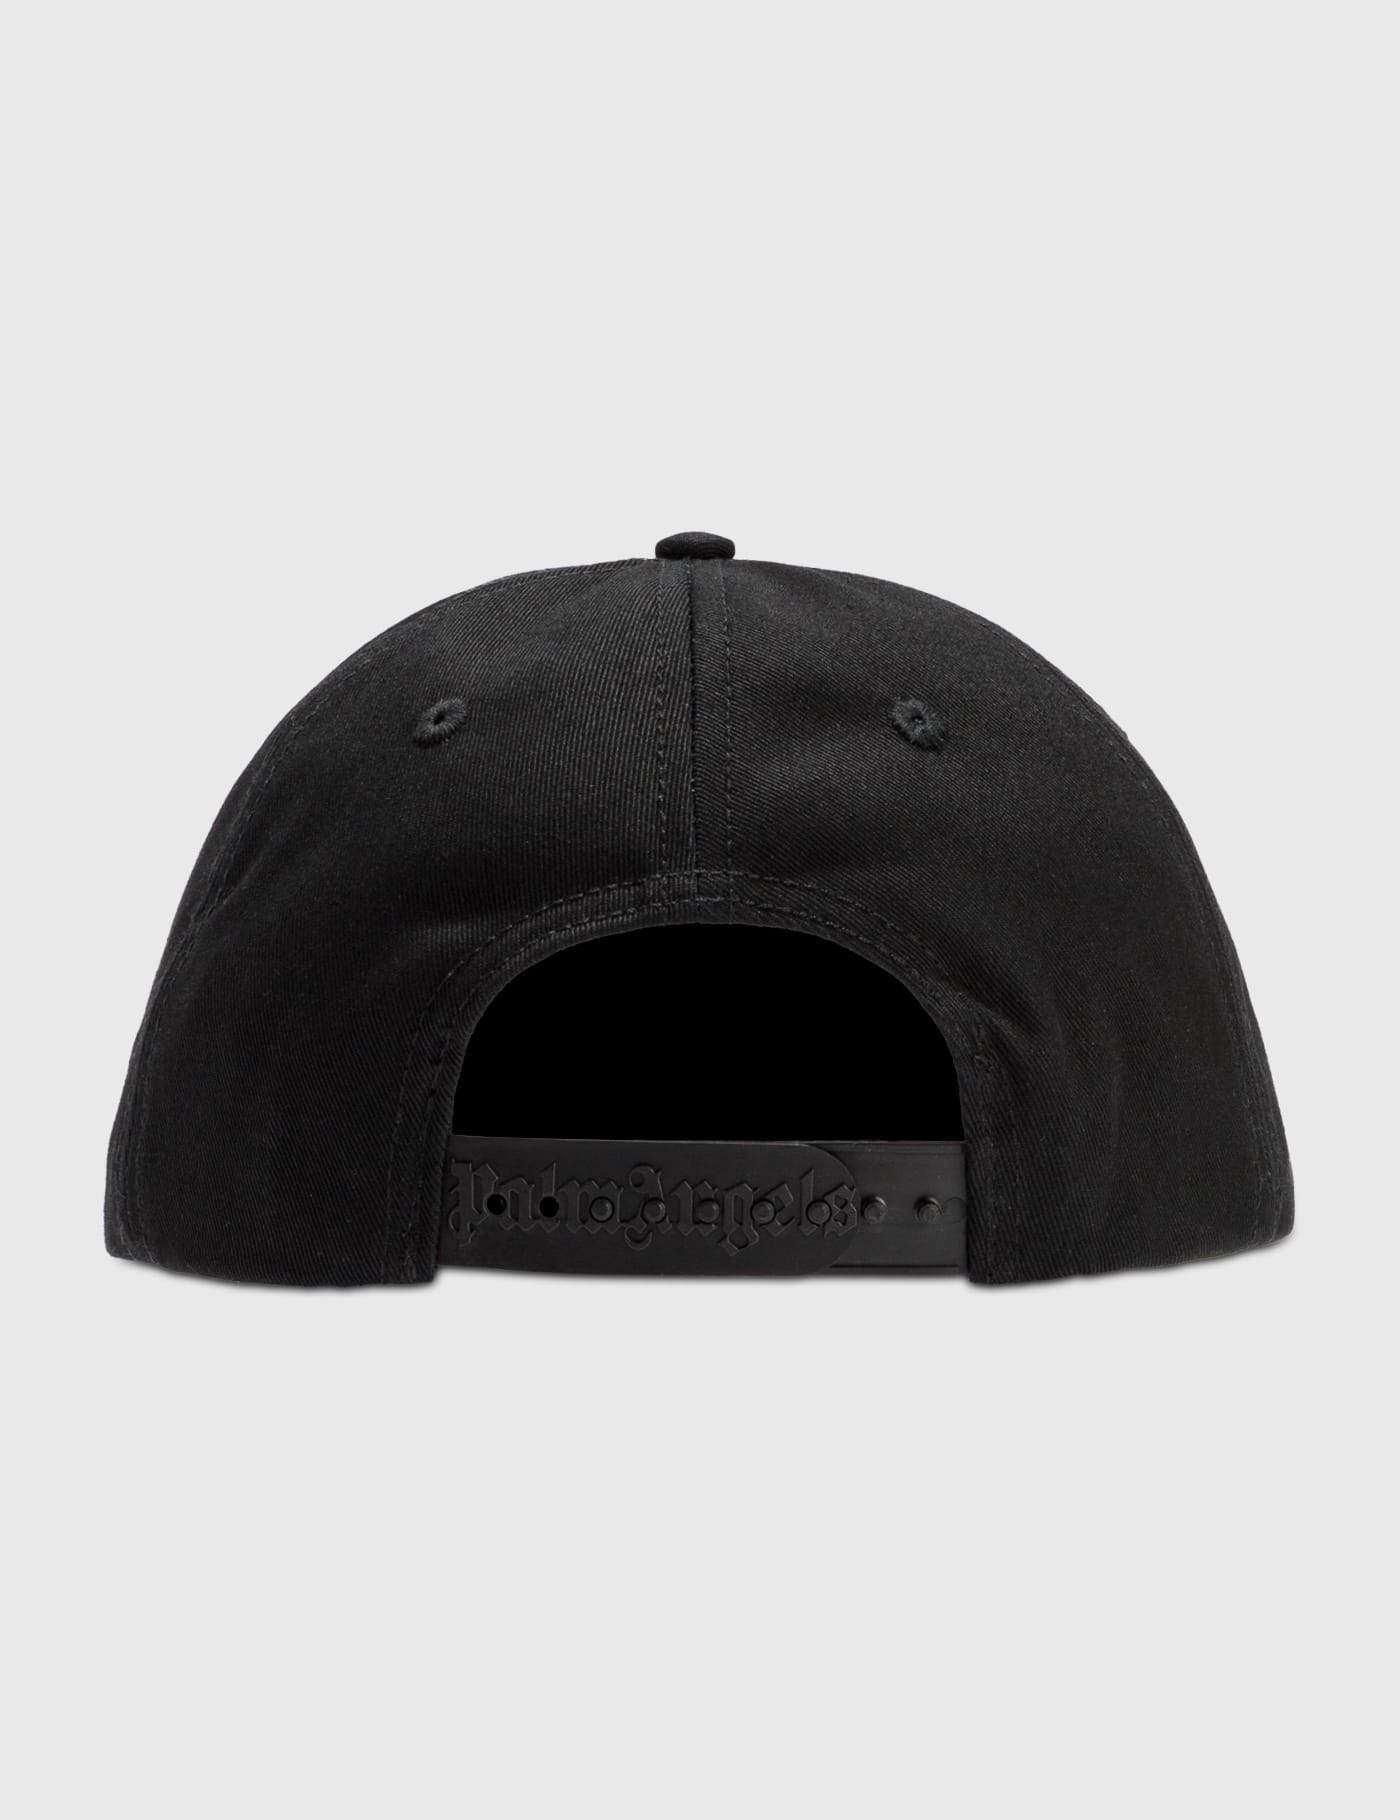 Palm Angels - Bear Cap | HBX - Globally Curated Fashion and 